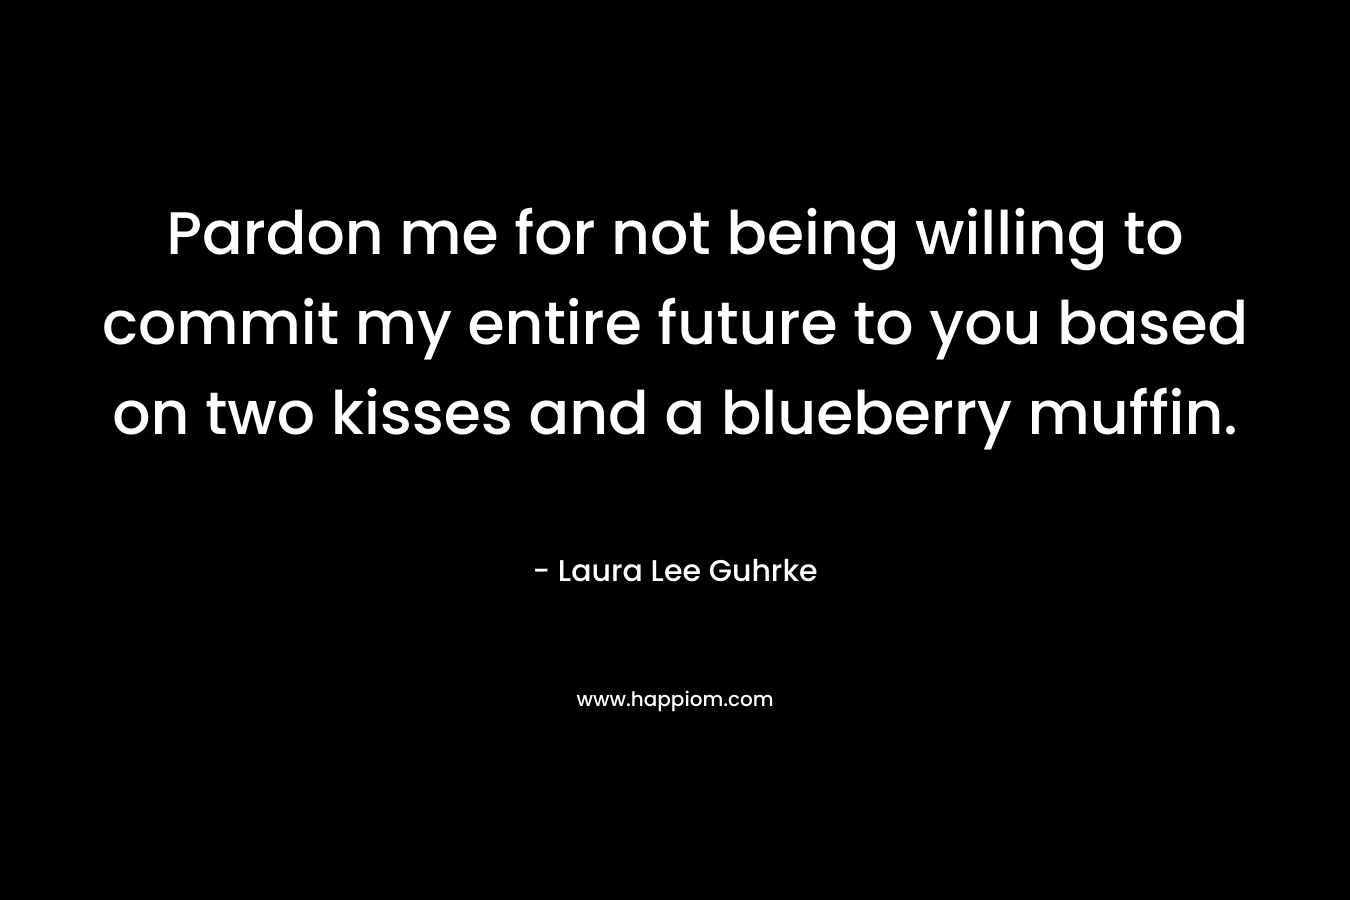 Pardon me for not being willing to commit my entire future to you based on two kisses and a blueberry muffin.